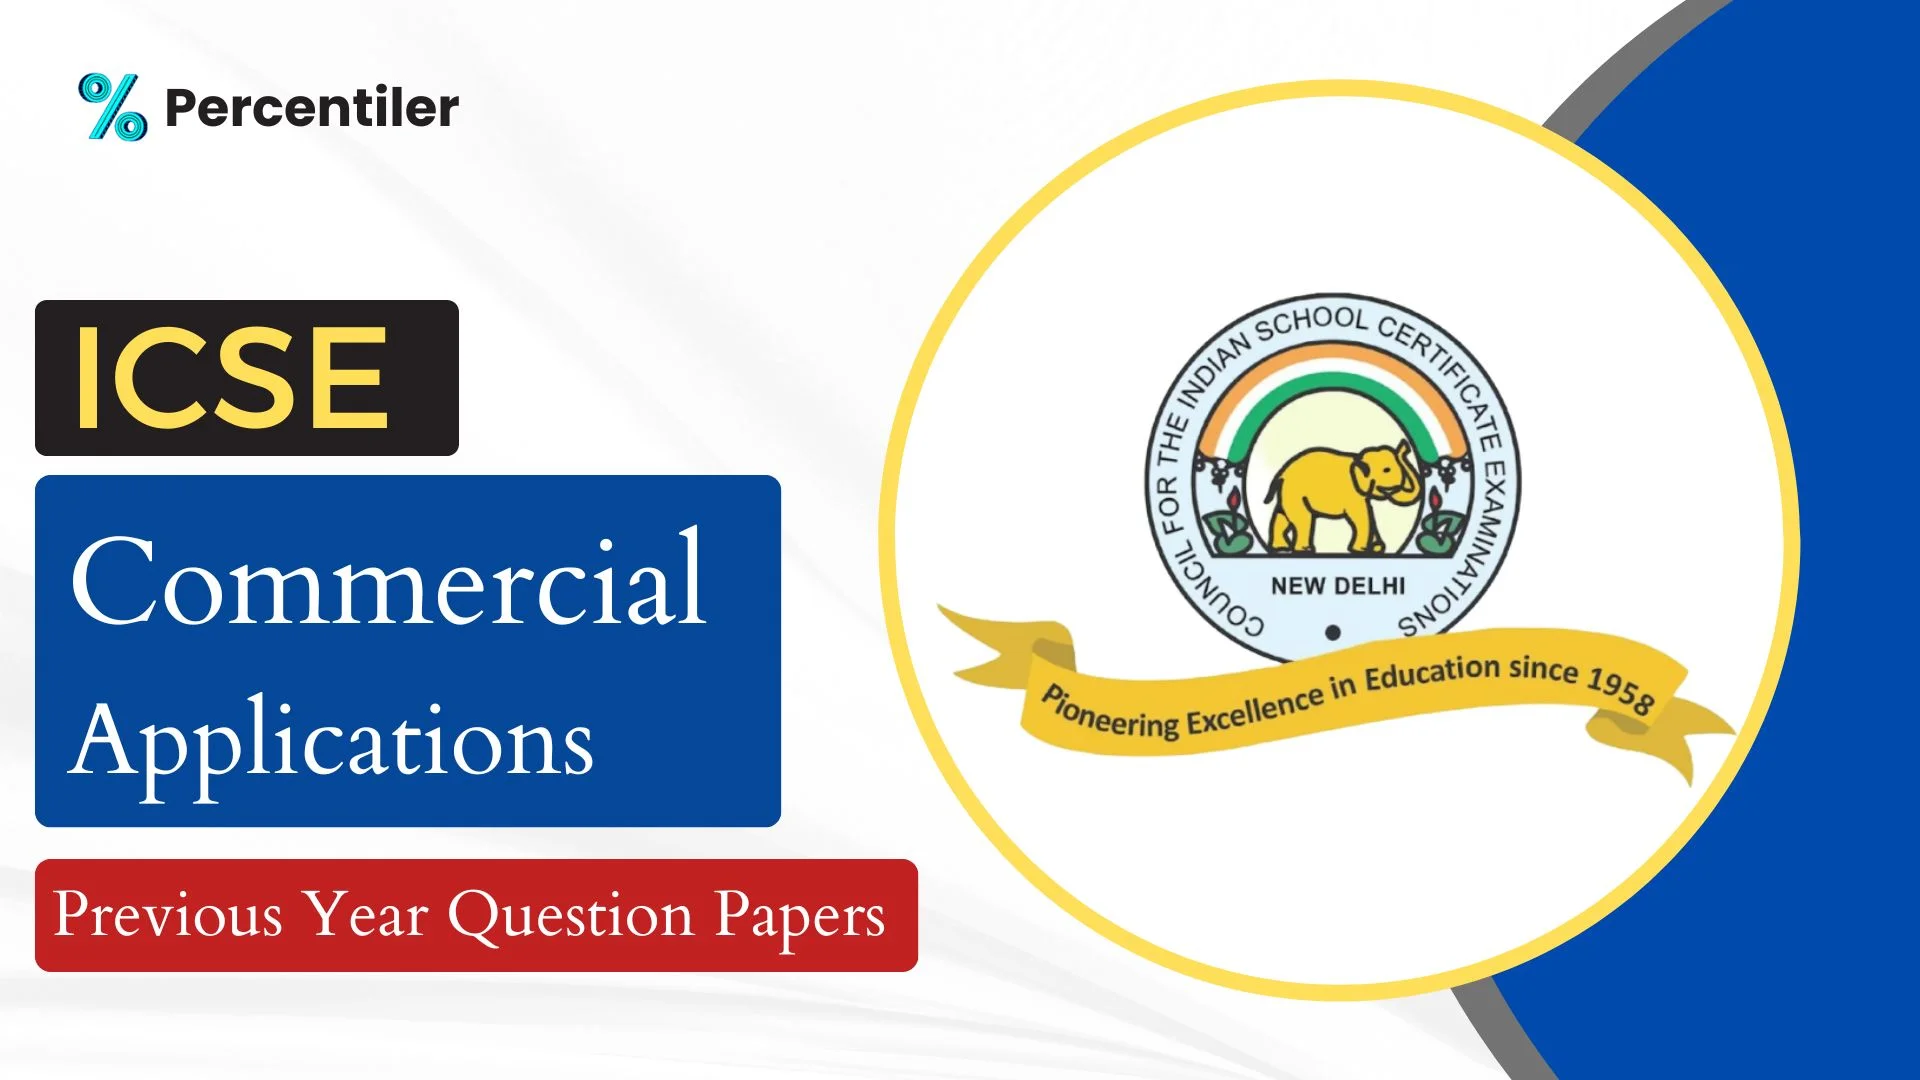 ICSE Commercial Application Previous Year Question Papers